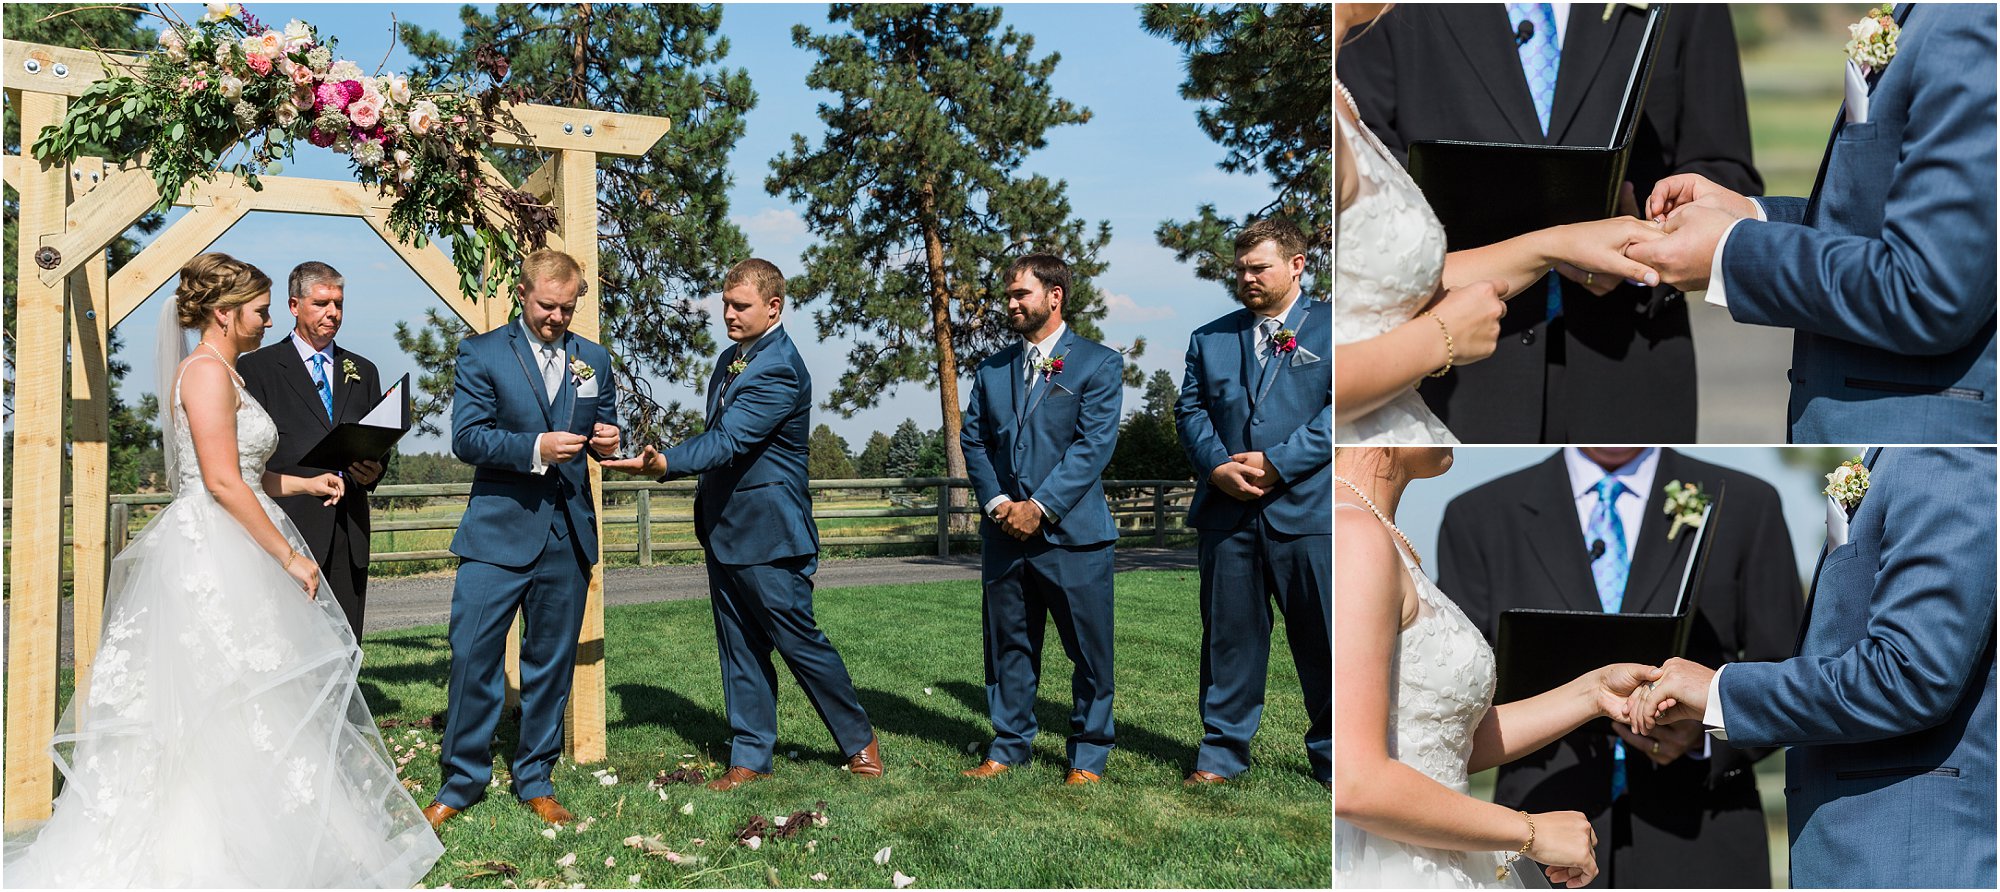 The exchanging of the rings during this rustic outdoor Rock Springs Ranch wedding in Central Oregon by Bend wedding photographer Erica Swantek Photography. 